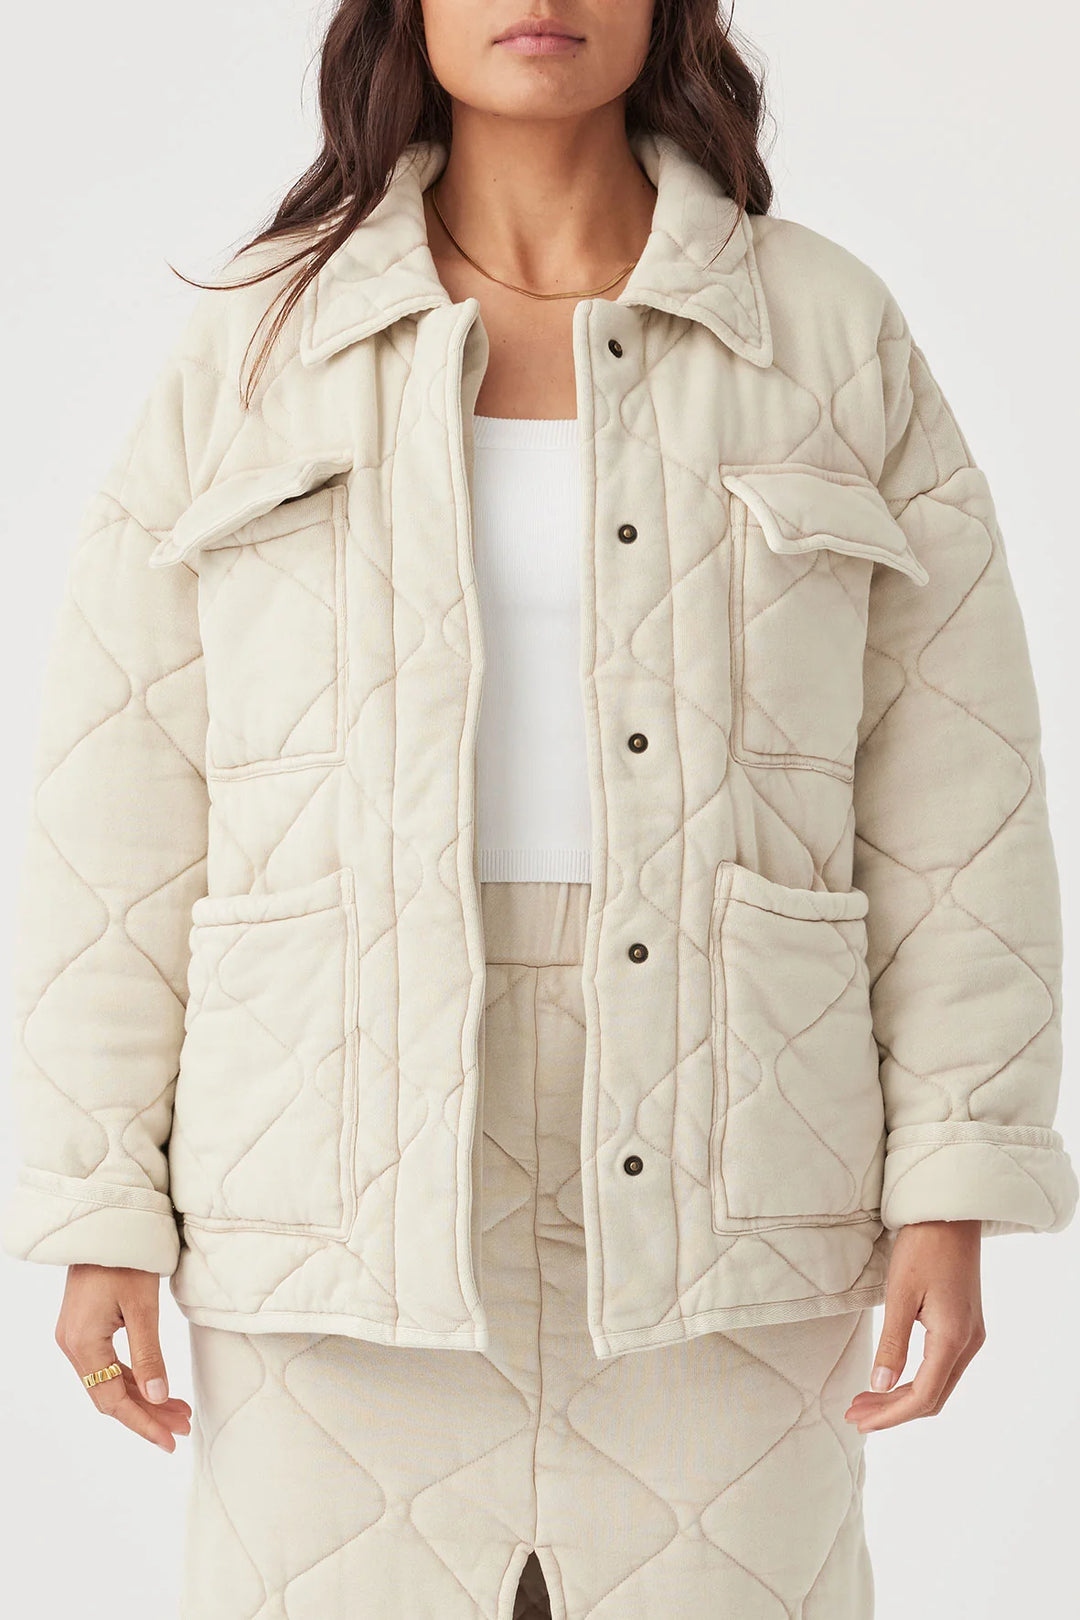 Arcaa SIA JACKET Sand, Quilted cotton jersey, Slouchy fit, Pop button fastening, Front pockets detail, Oversized fit